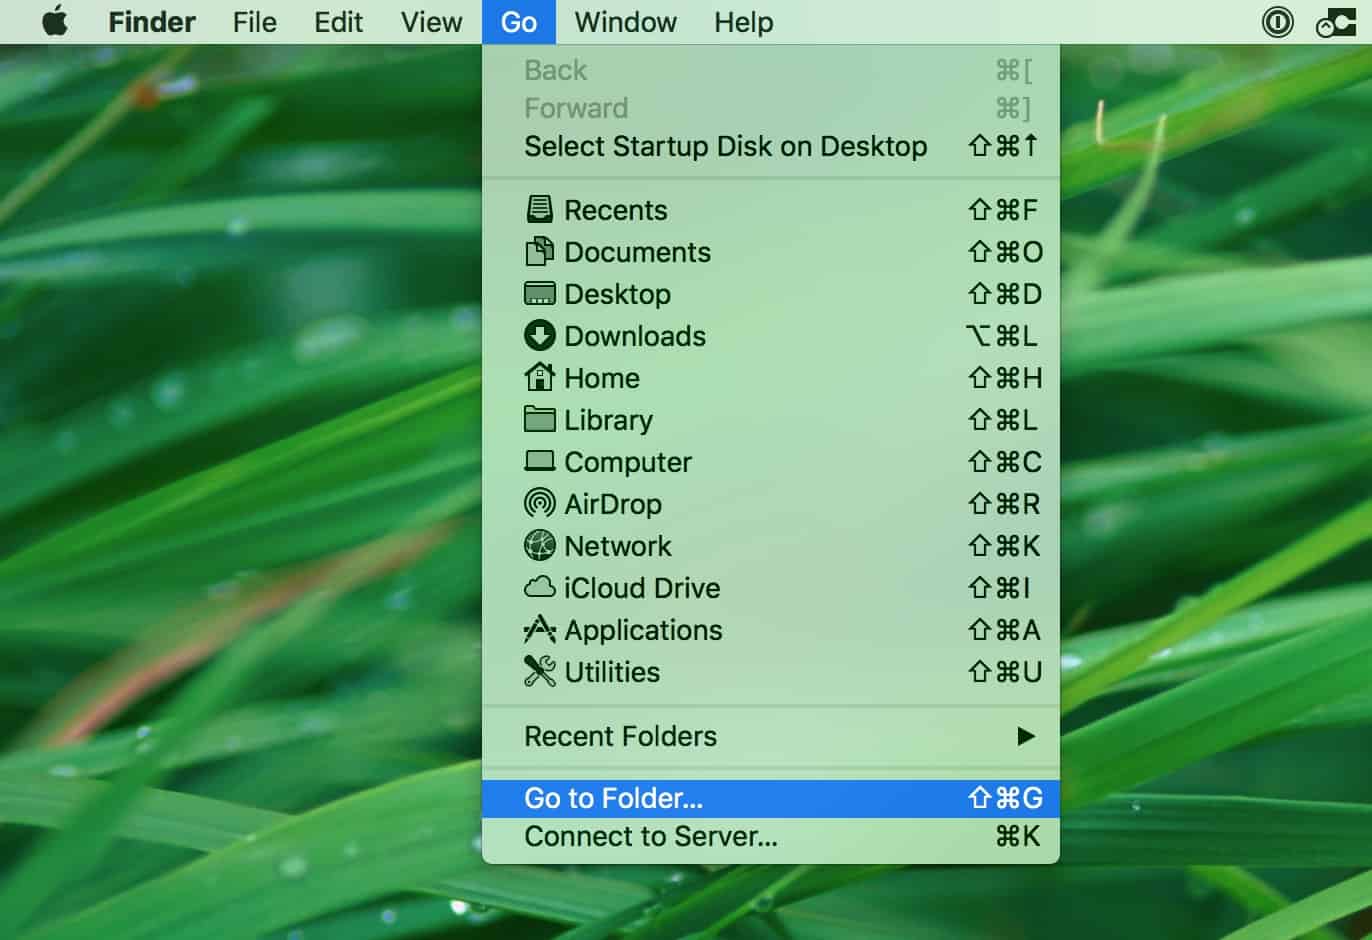 "Go" Menu in Finder in macOS for going to specific locations on your Mac